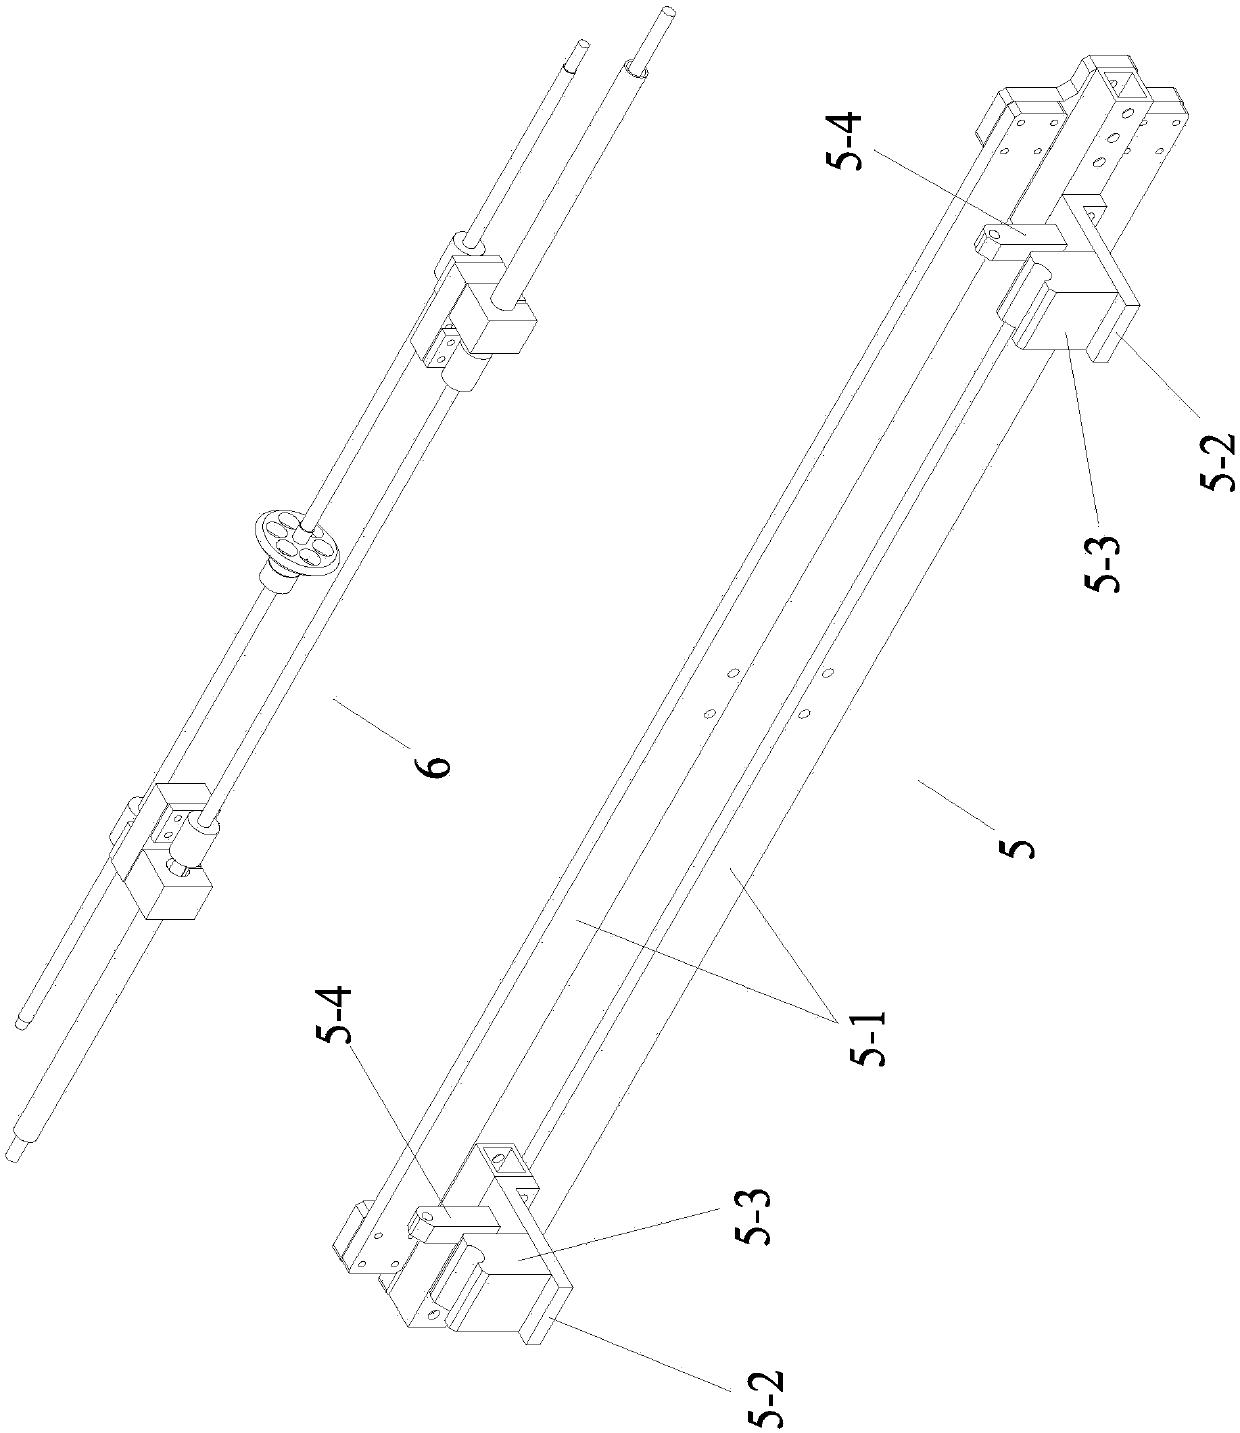 Centering positioning device suitable for vehicle indoors with different internal widths